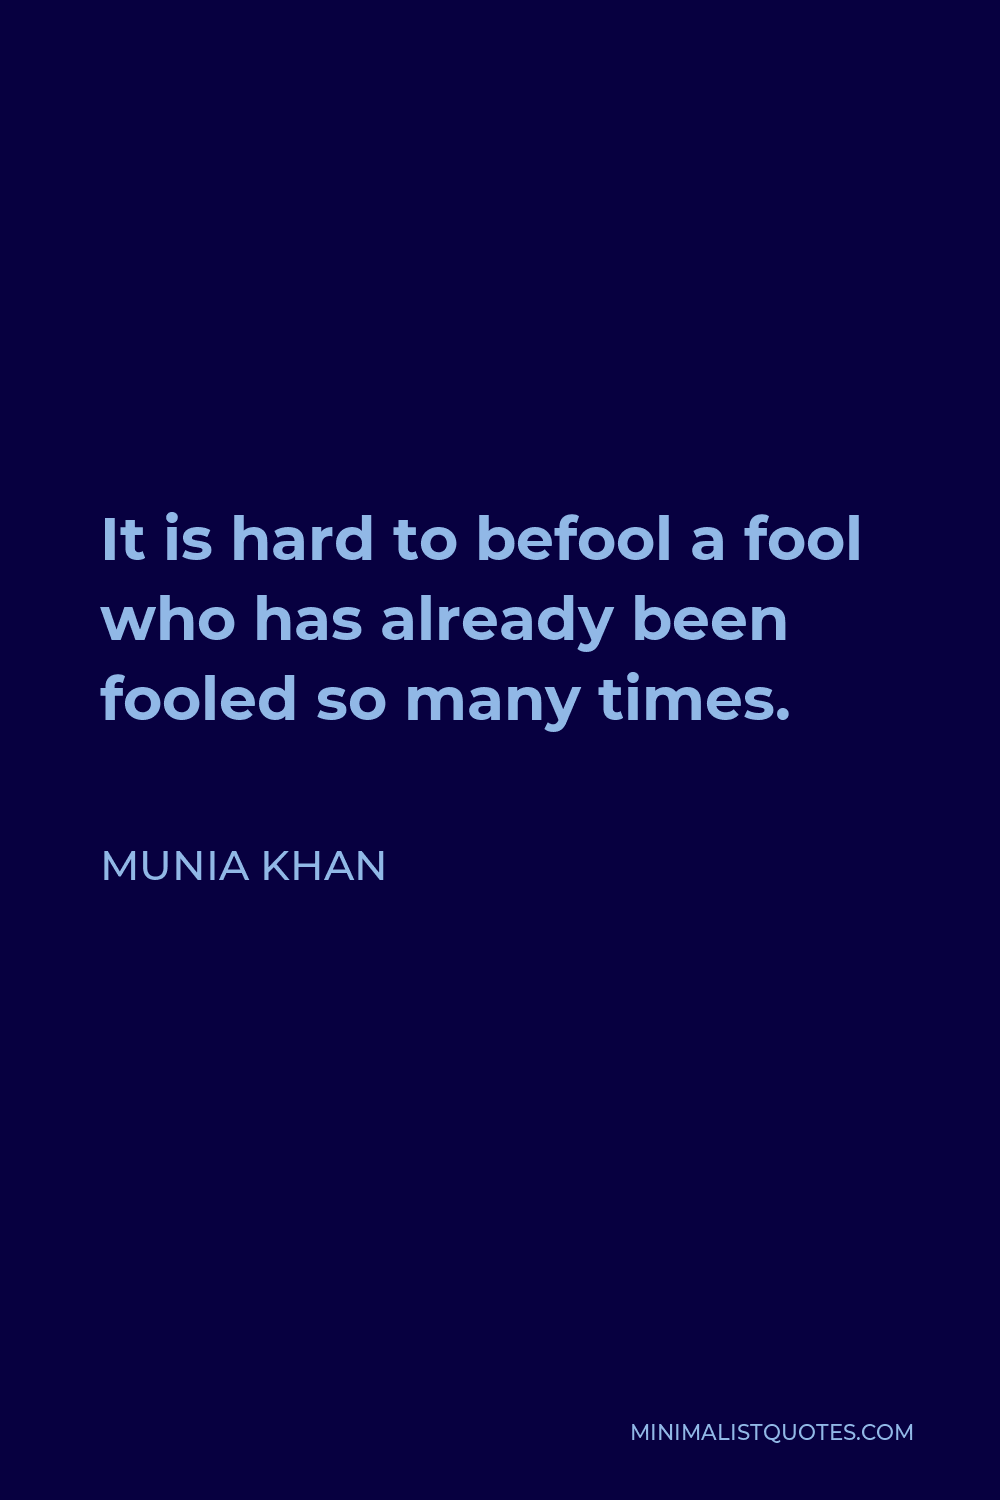 Munia Khan Quote - It is hard to befool a fool who has already been fooled so many times.